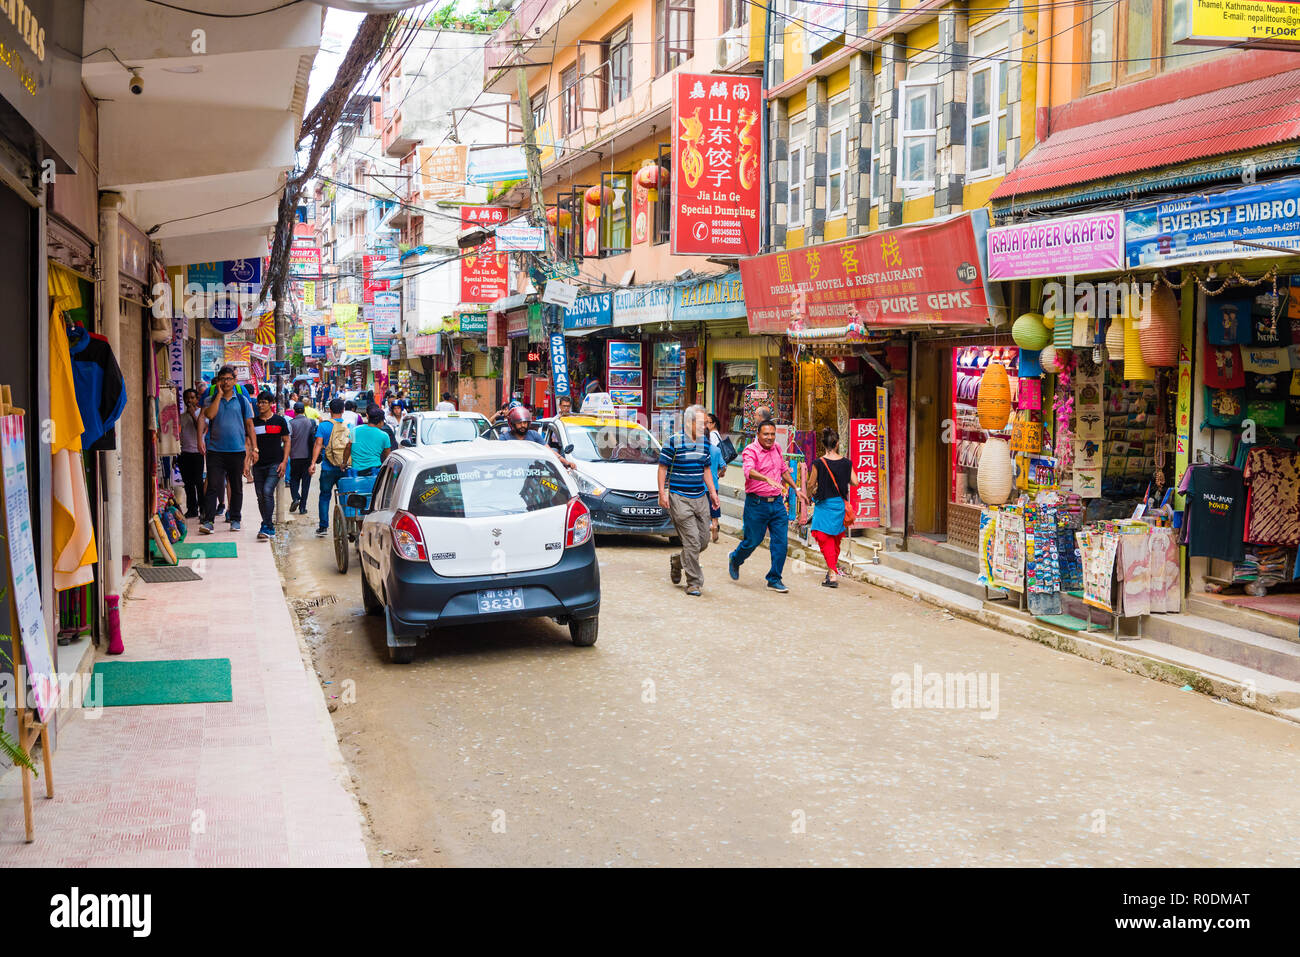 Thamel, Kathmandu, Nepal - August 2, 2018 : Street view in Thamel district, known as the centre of the tourist industry in Kathmandu Stock Photo